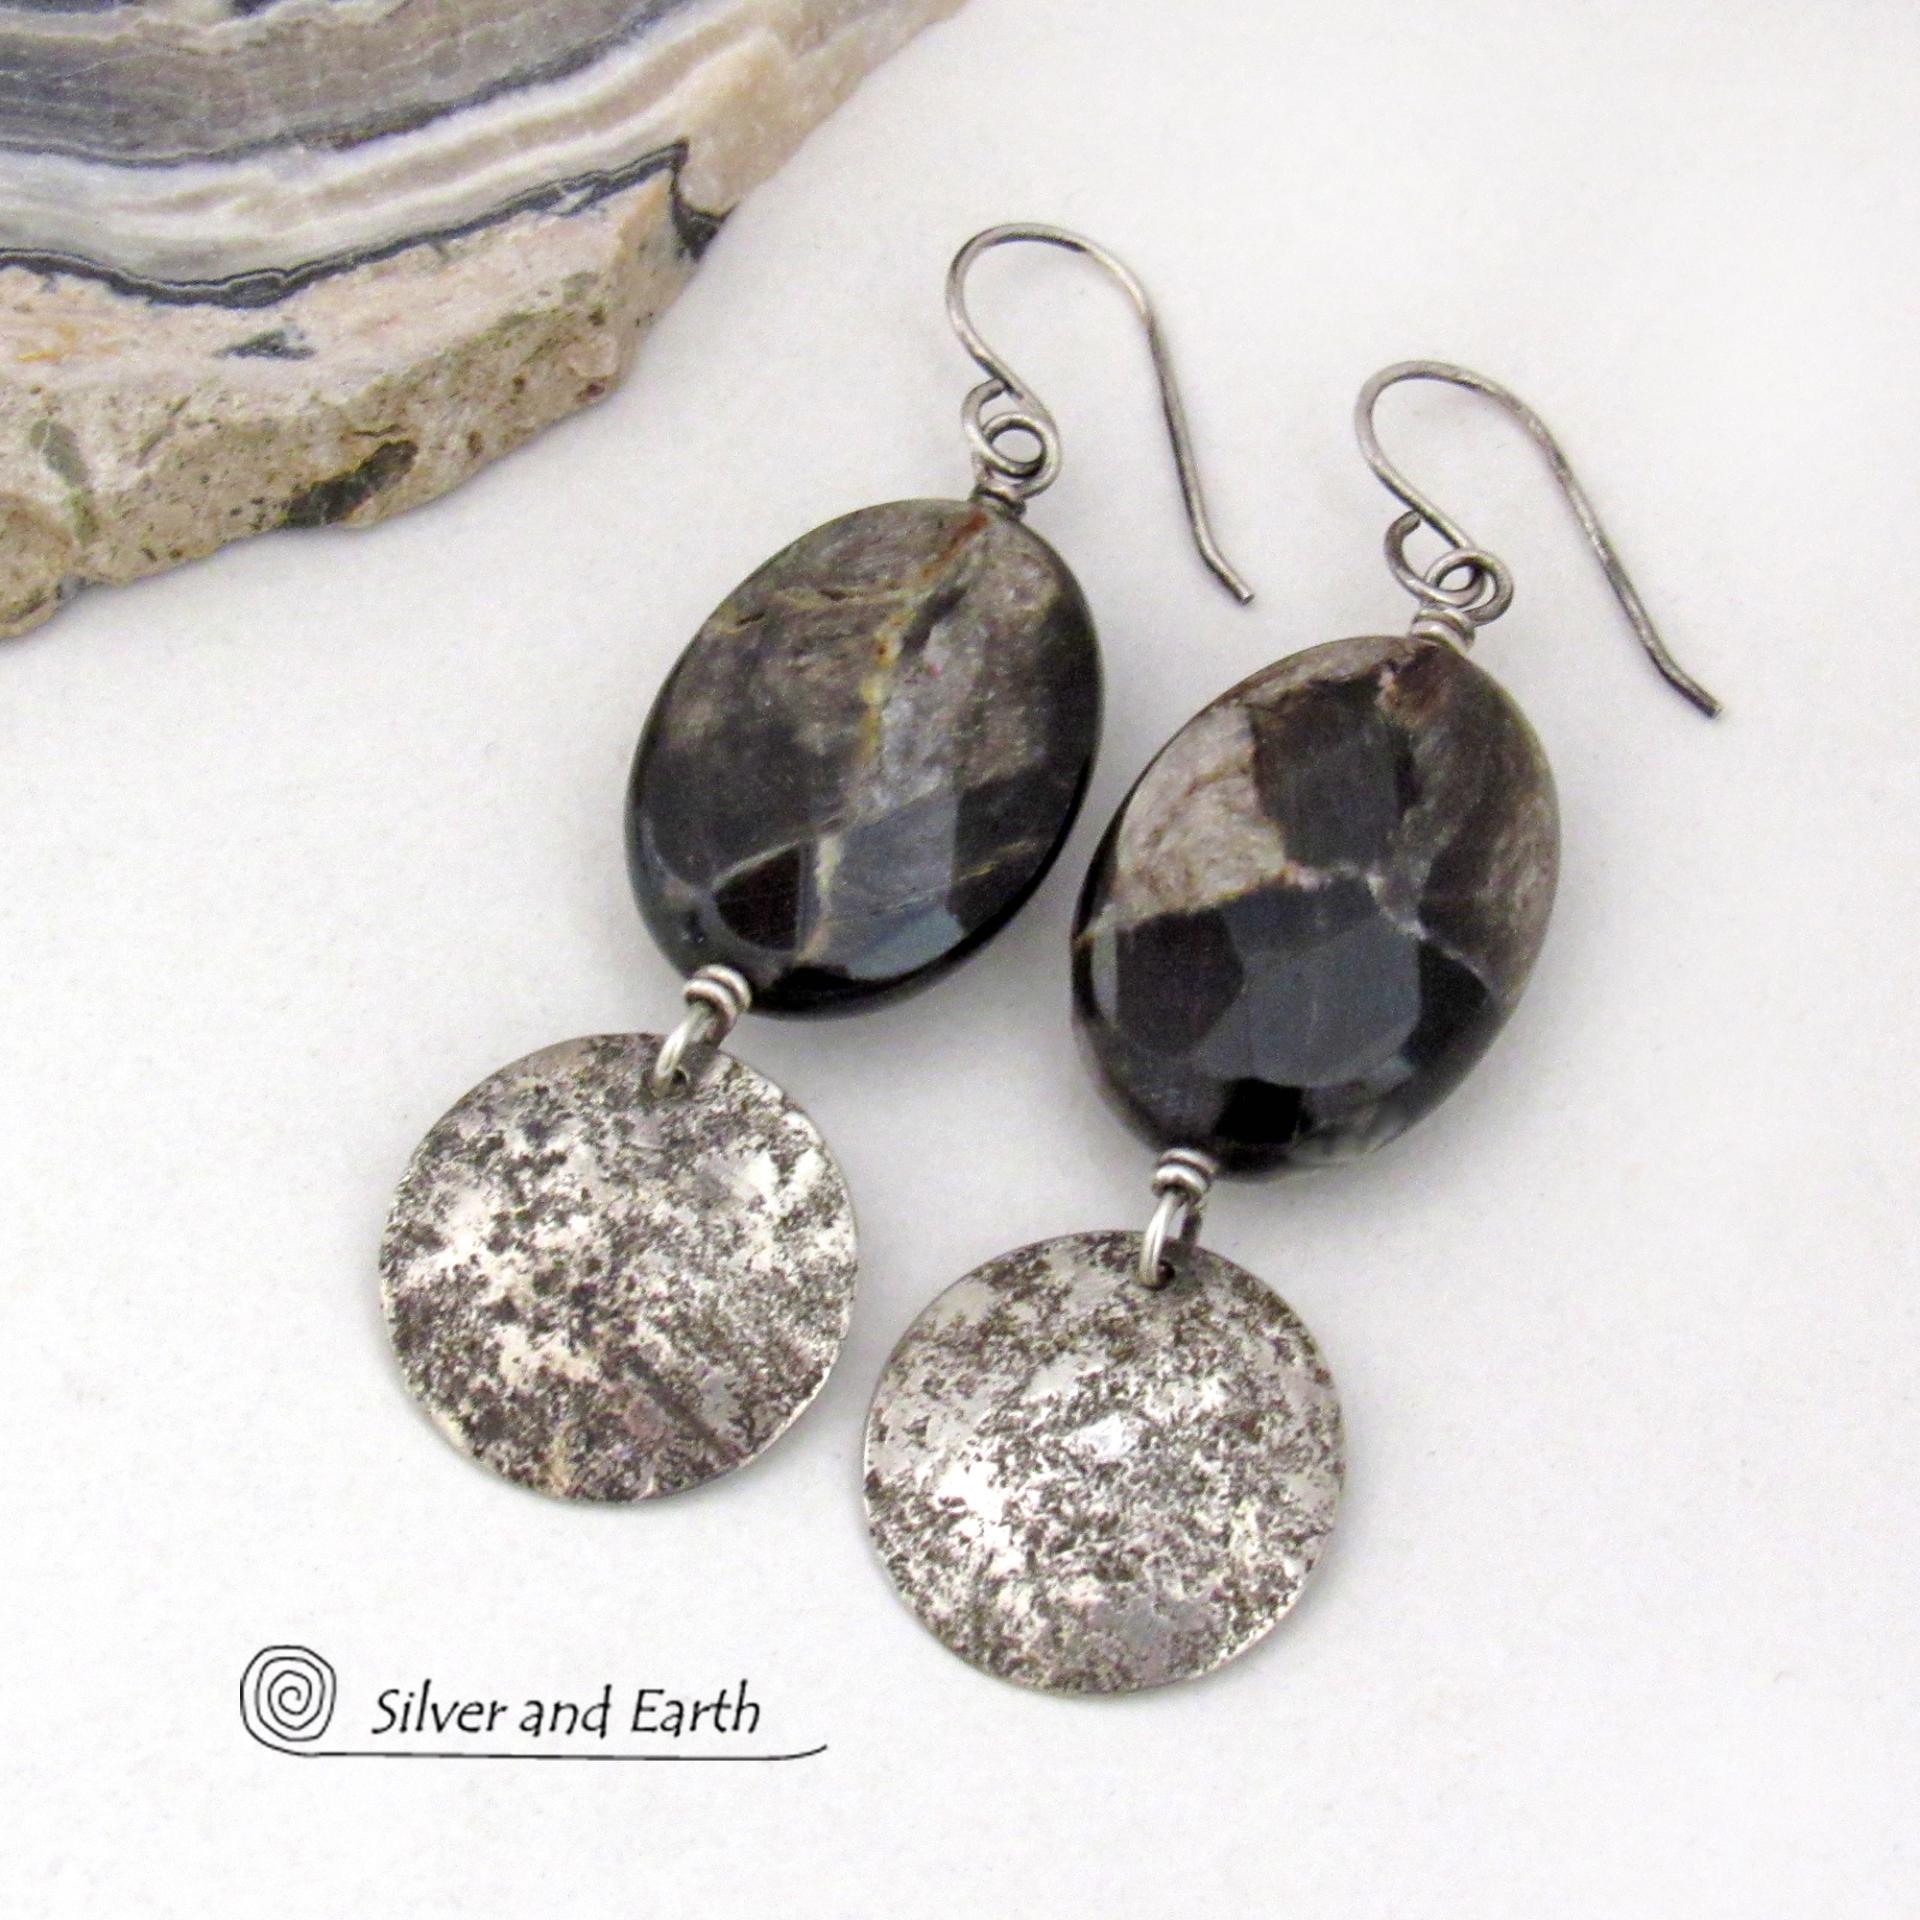 Sterling Silver Earrings with Brown Sparkly Mica Stones - Faceted Gemstone and Sterling Jewelry